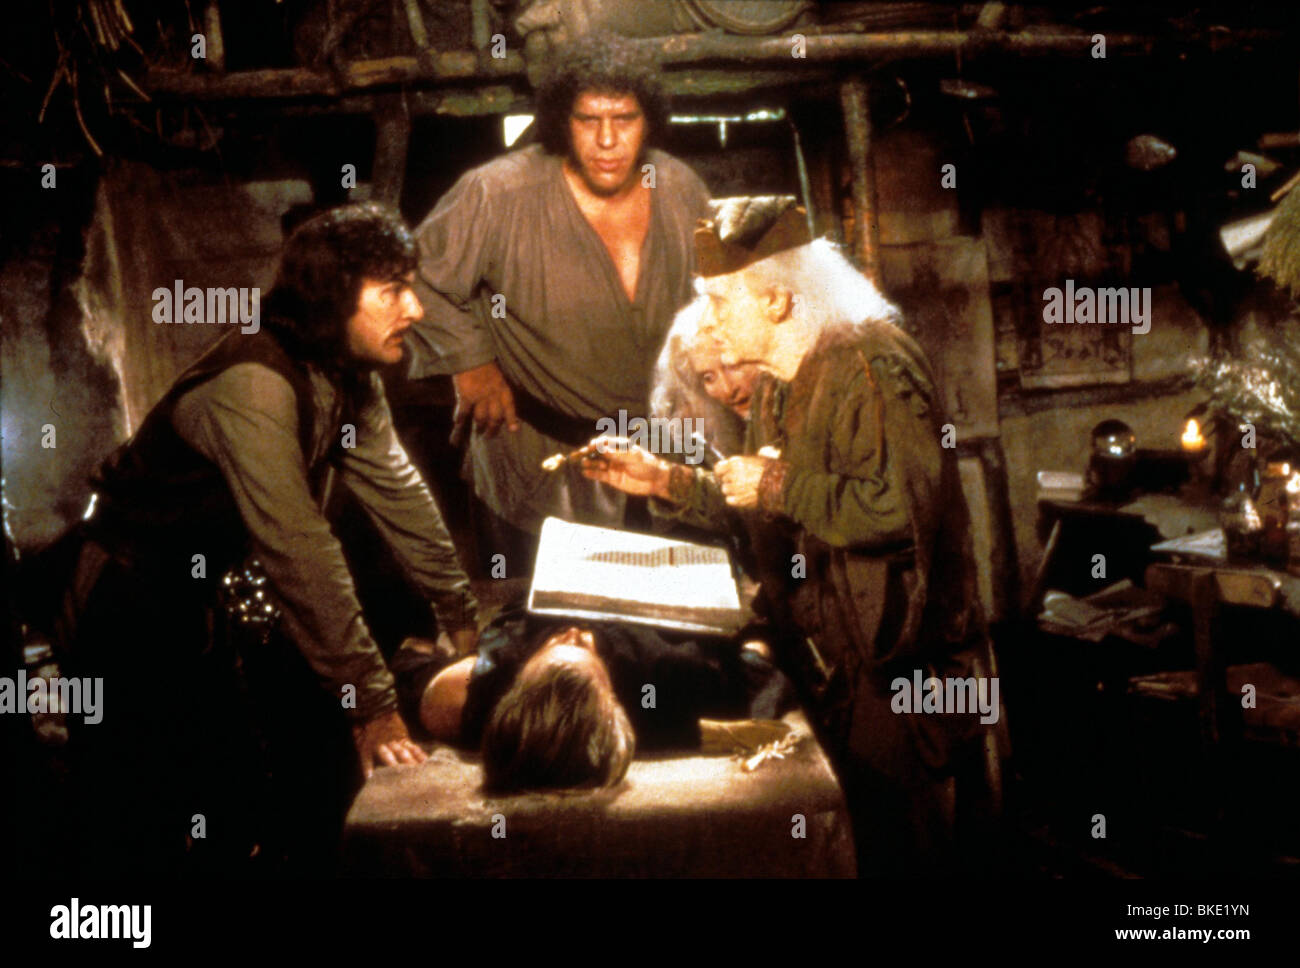 THE PRINCESS BRIDE (1987) MANDY PATINKIN, ANDRE THE GIANT, CARY ELWES, BILLY CRYSTAL PRB 032 Stock Photo